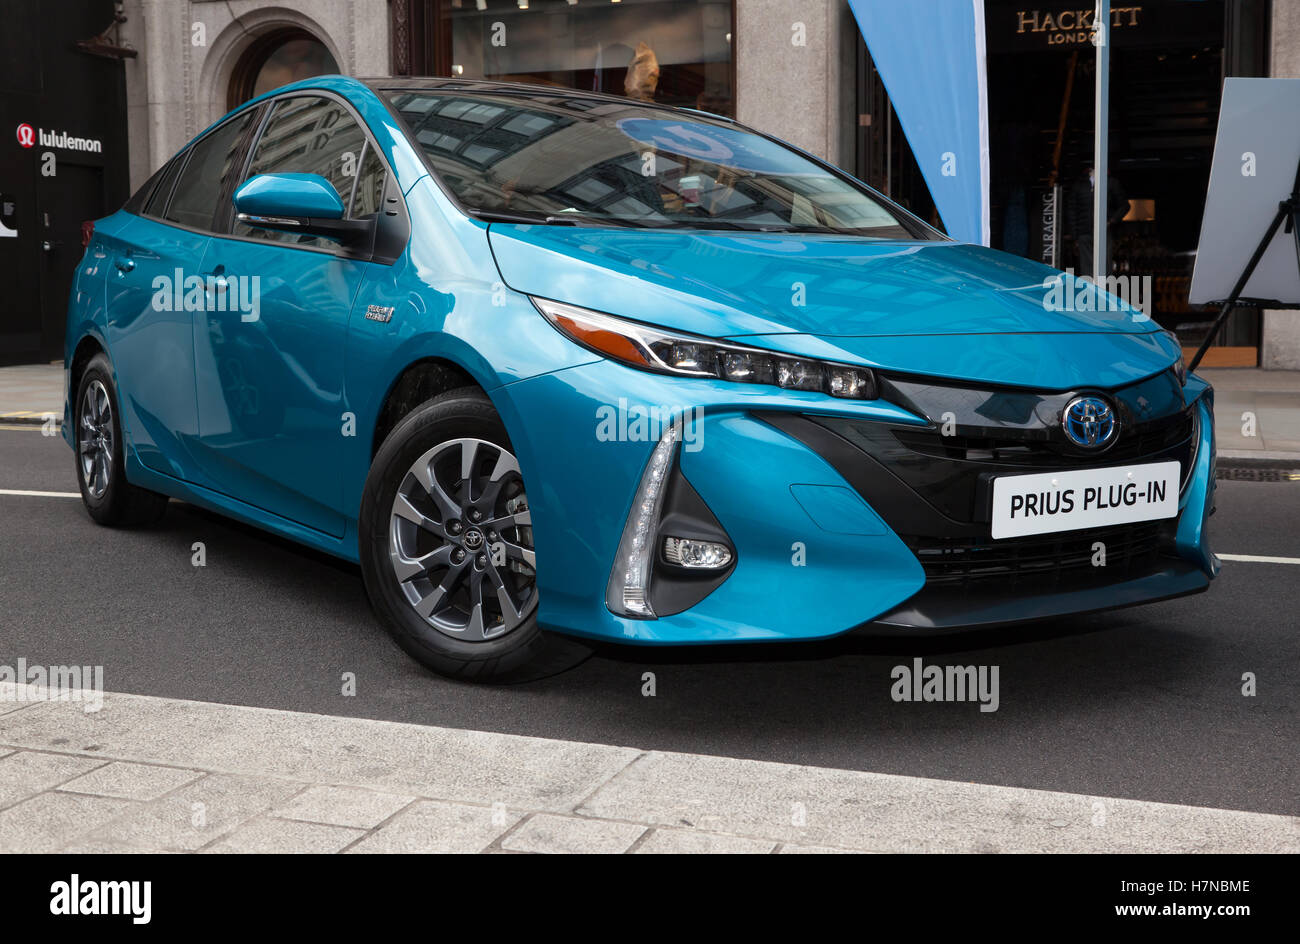 The 2017 Toyota Prius Prime plug-in hybrid on display in the Low Emission Motoring Zone, of the 2016 Regents Street Motor Show Stock Photo